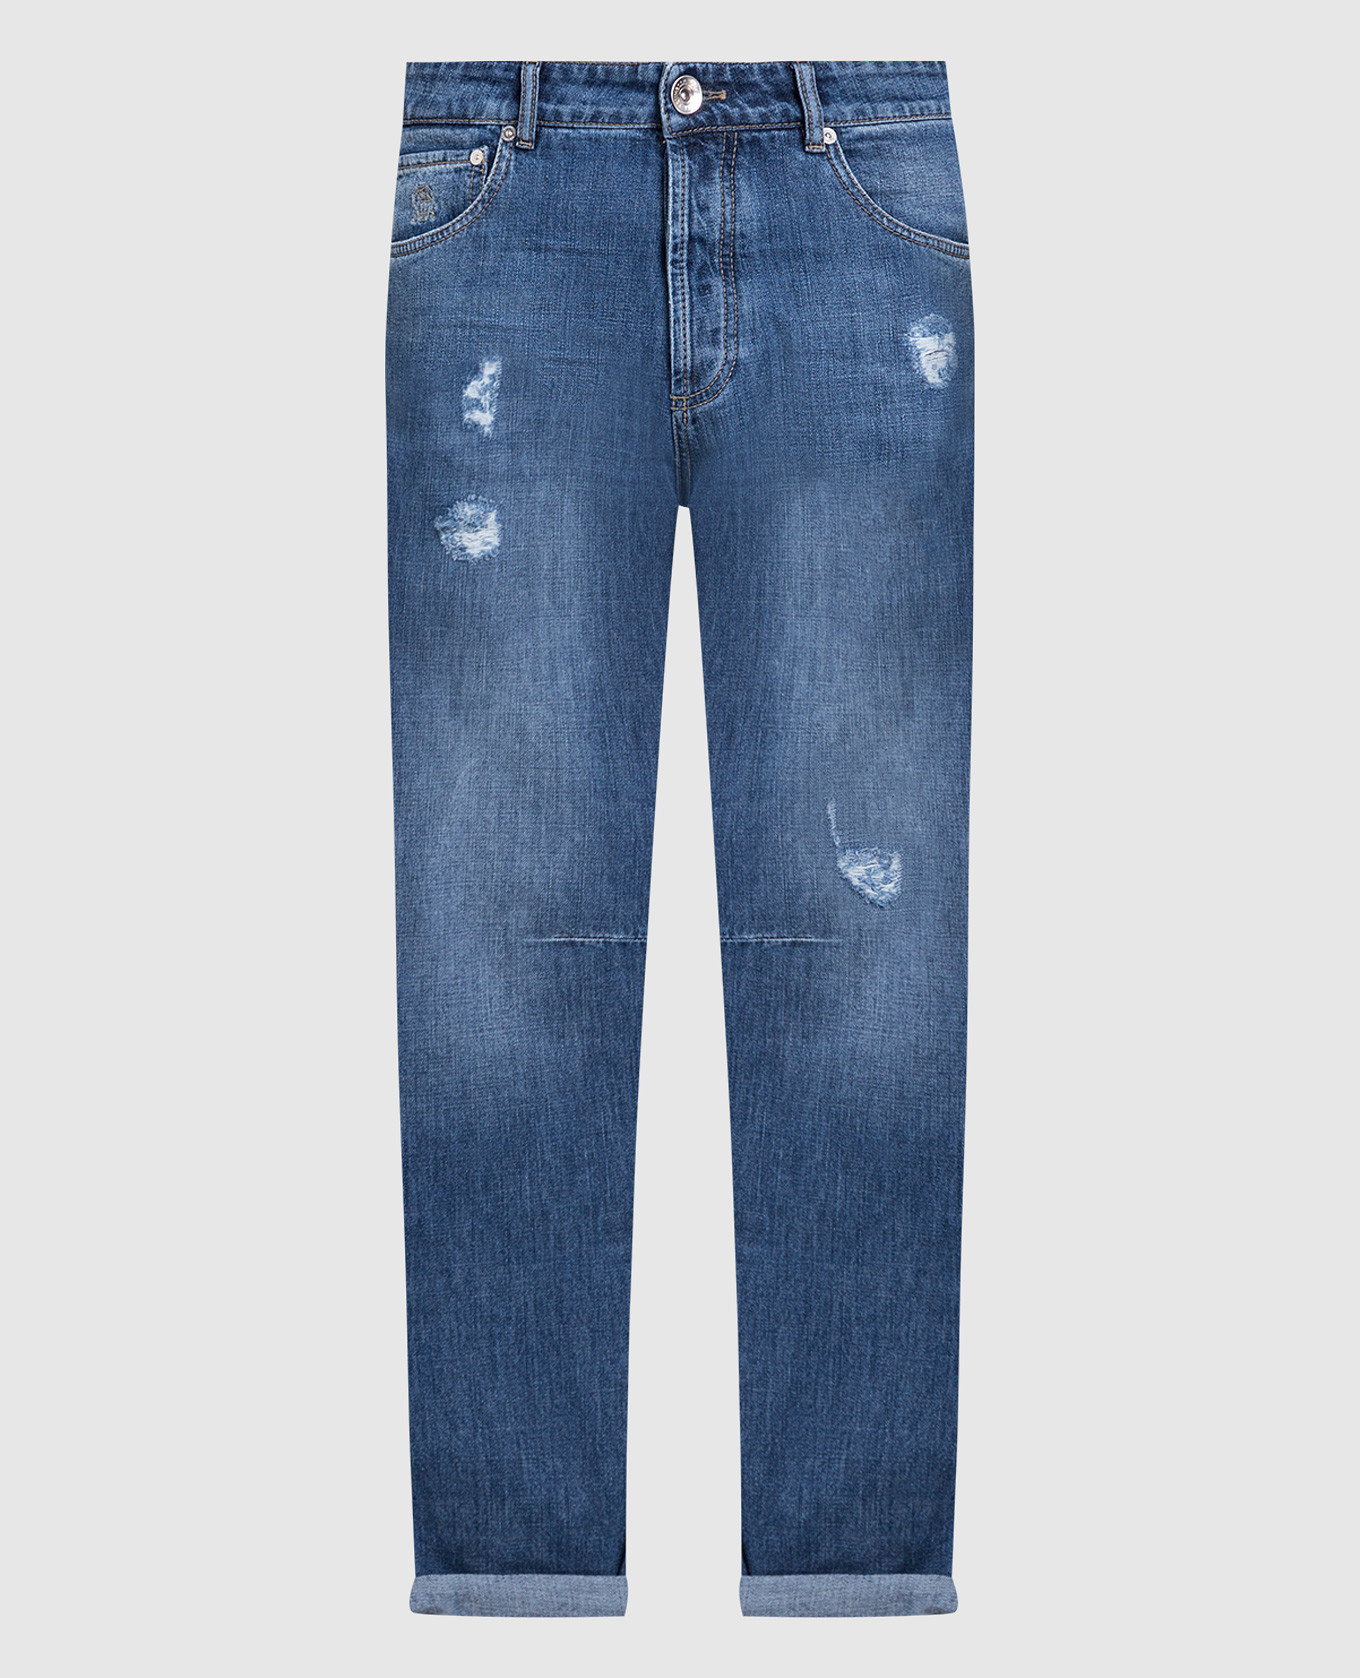 Blue jeans with holes